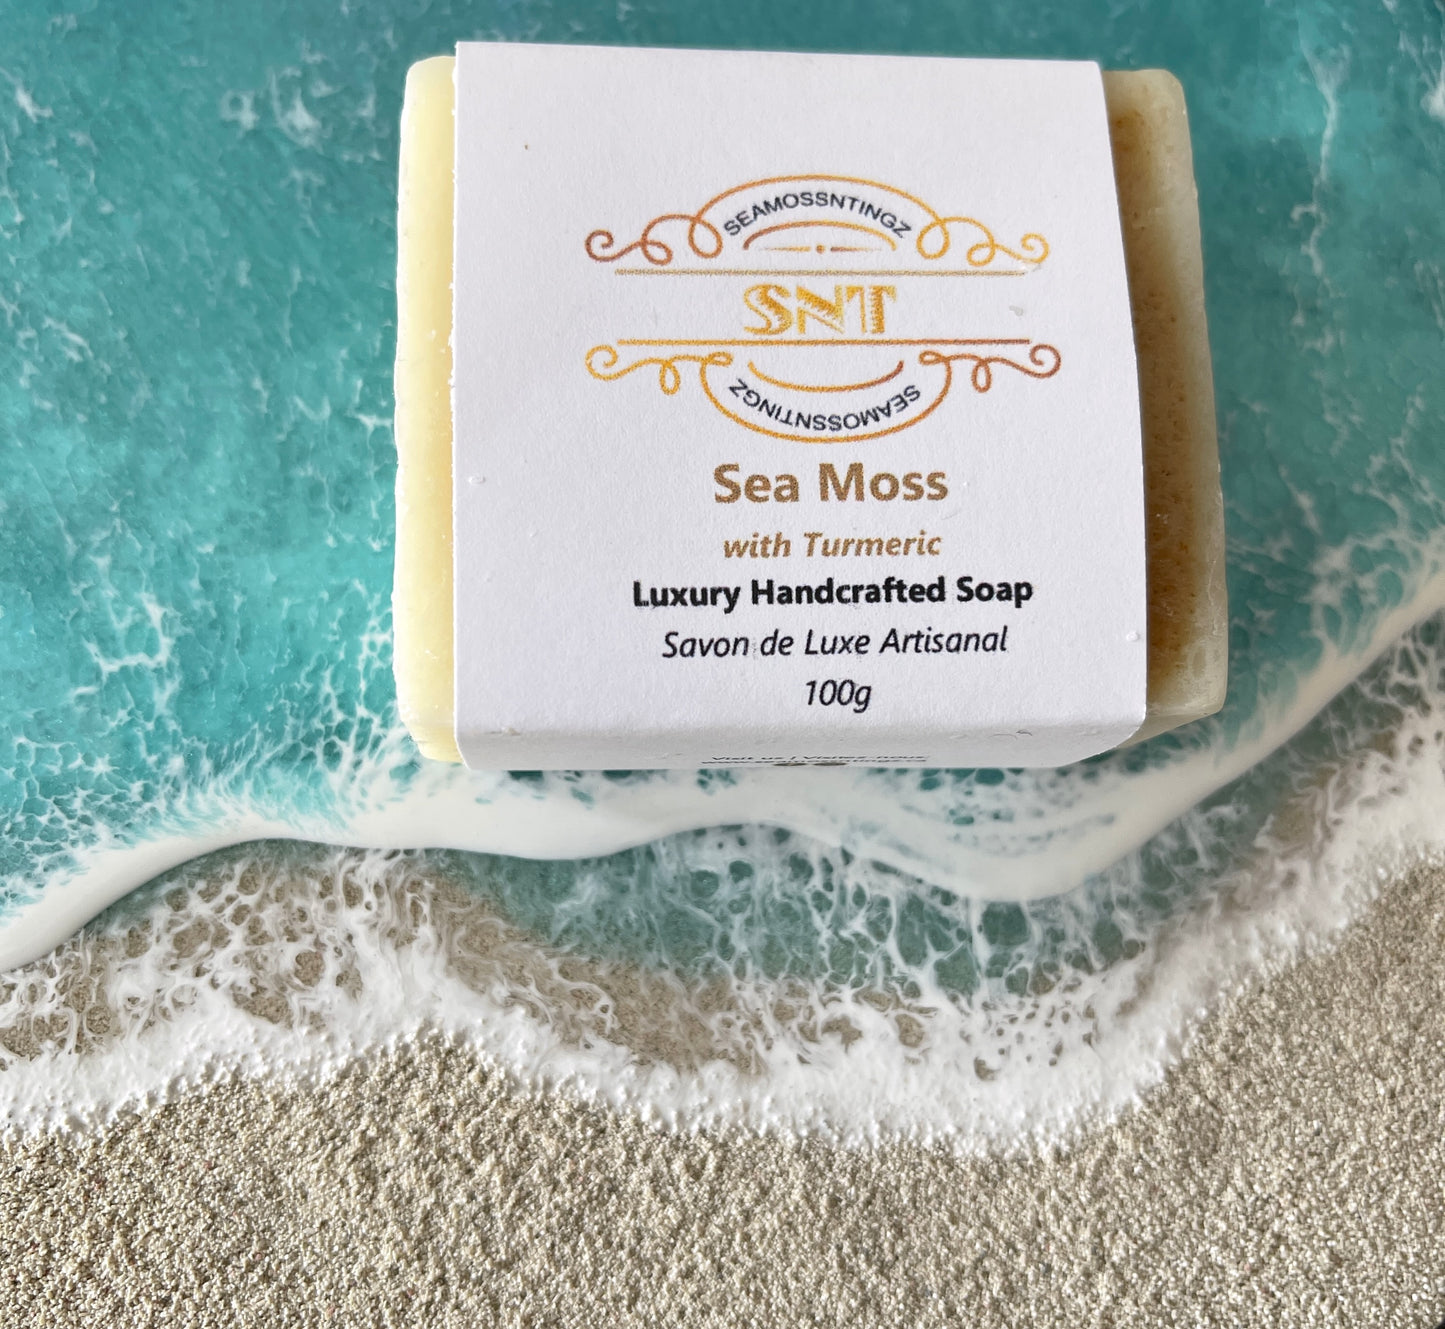 Luxurious Handcrafted Sea Moss & Turmeric Soap